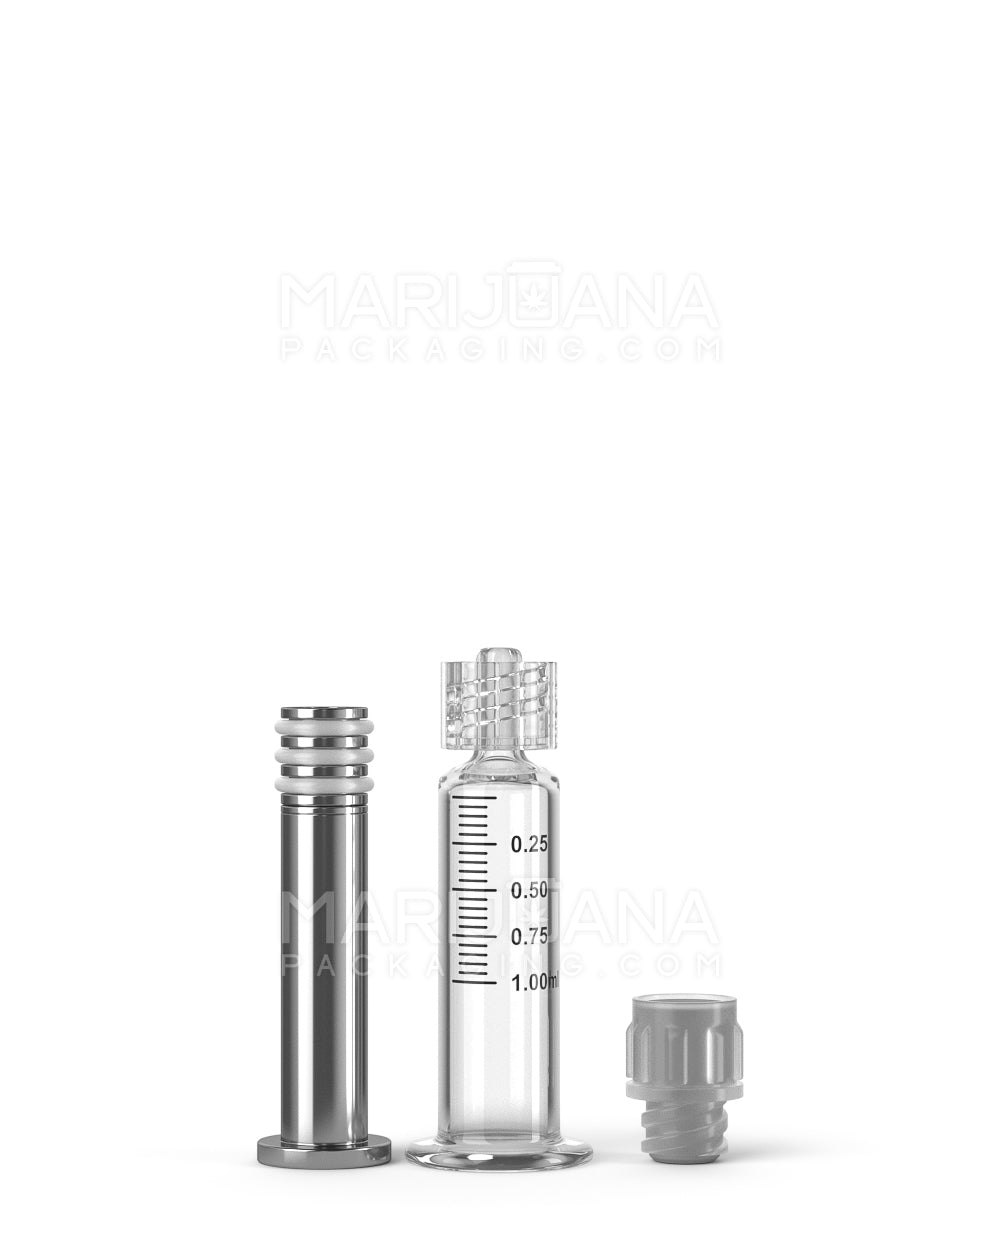 Luer Lock | Glass Dab Applicator Syringes w/ Metal Plunger | 1mL - 0.25mL Increments | Sample - 3